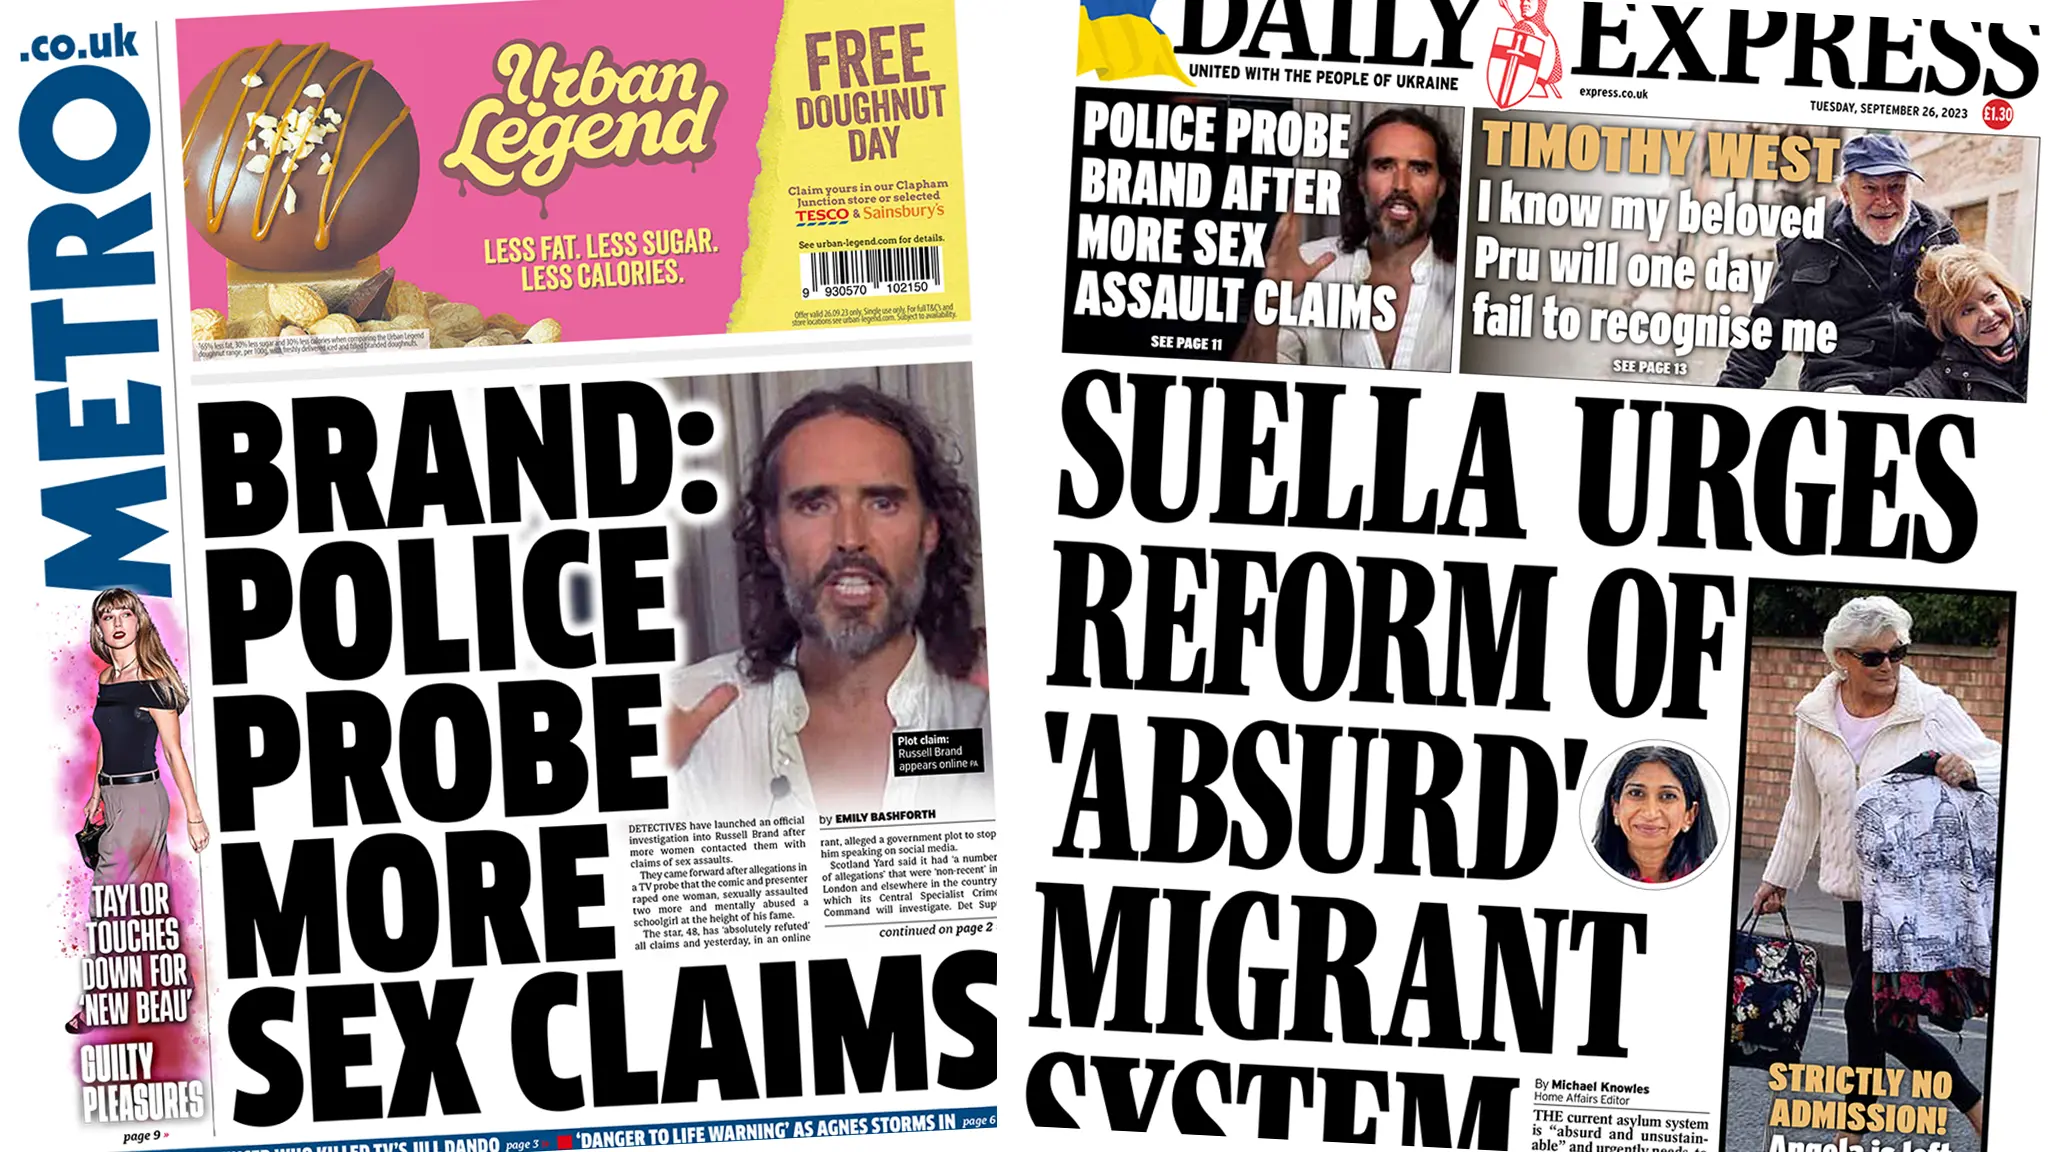 The headline in the Metro reads, "Brand: Police probe more sex claims", while the headline in the Express reads, "Suella urges reform of 'absurd' migrant system"